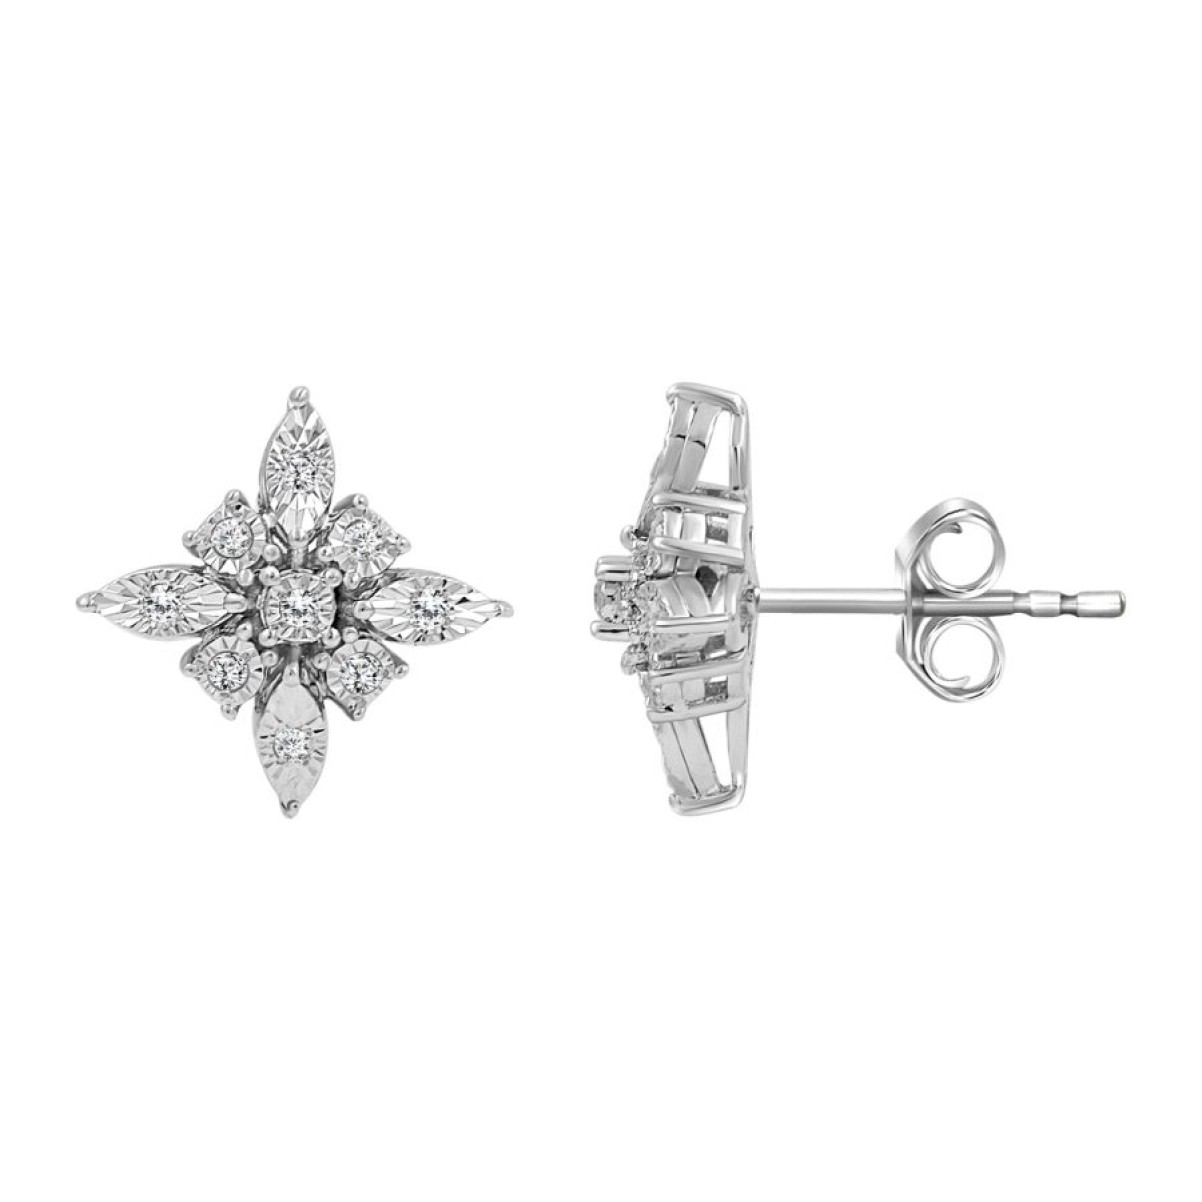 EARRINGS 0.10CT ROUND DIAMOND STERLING SILVER WHITE